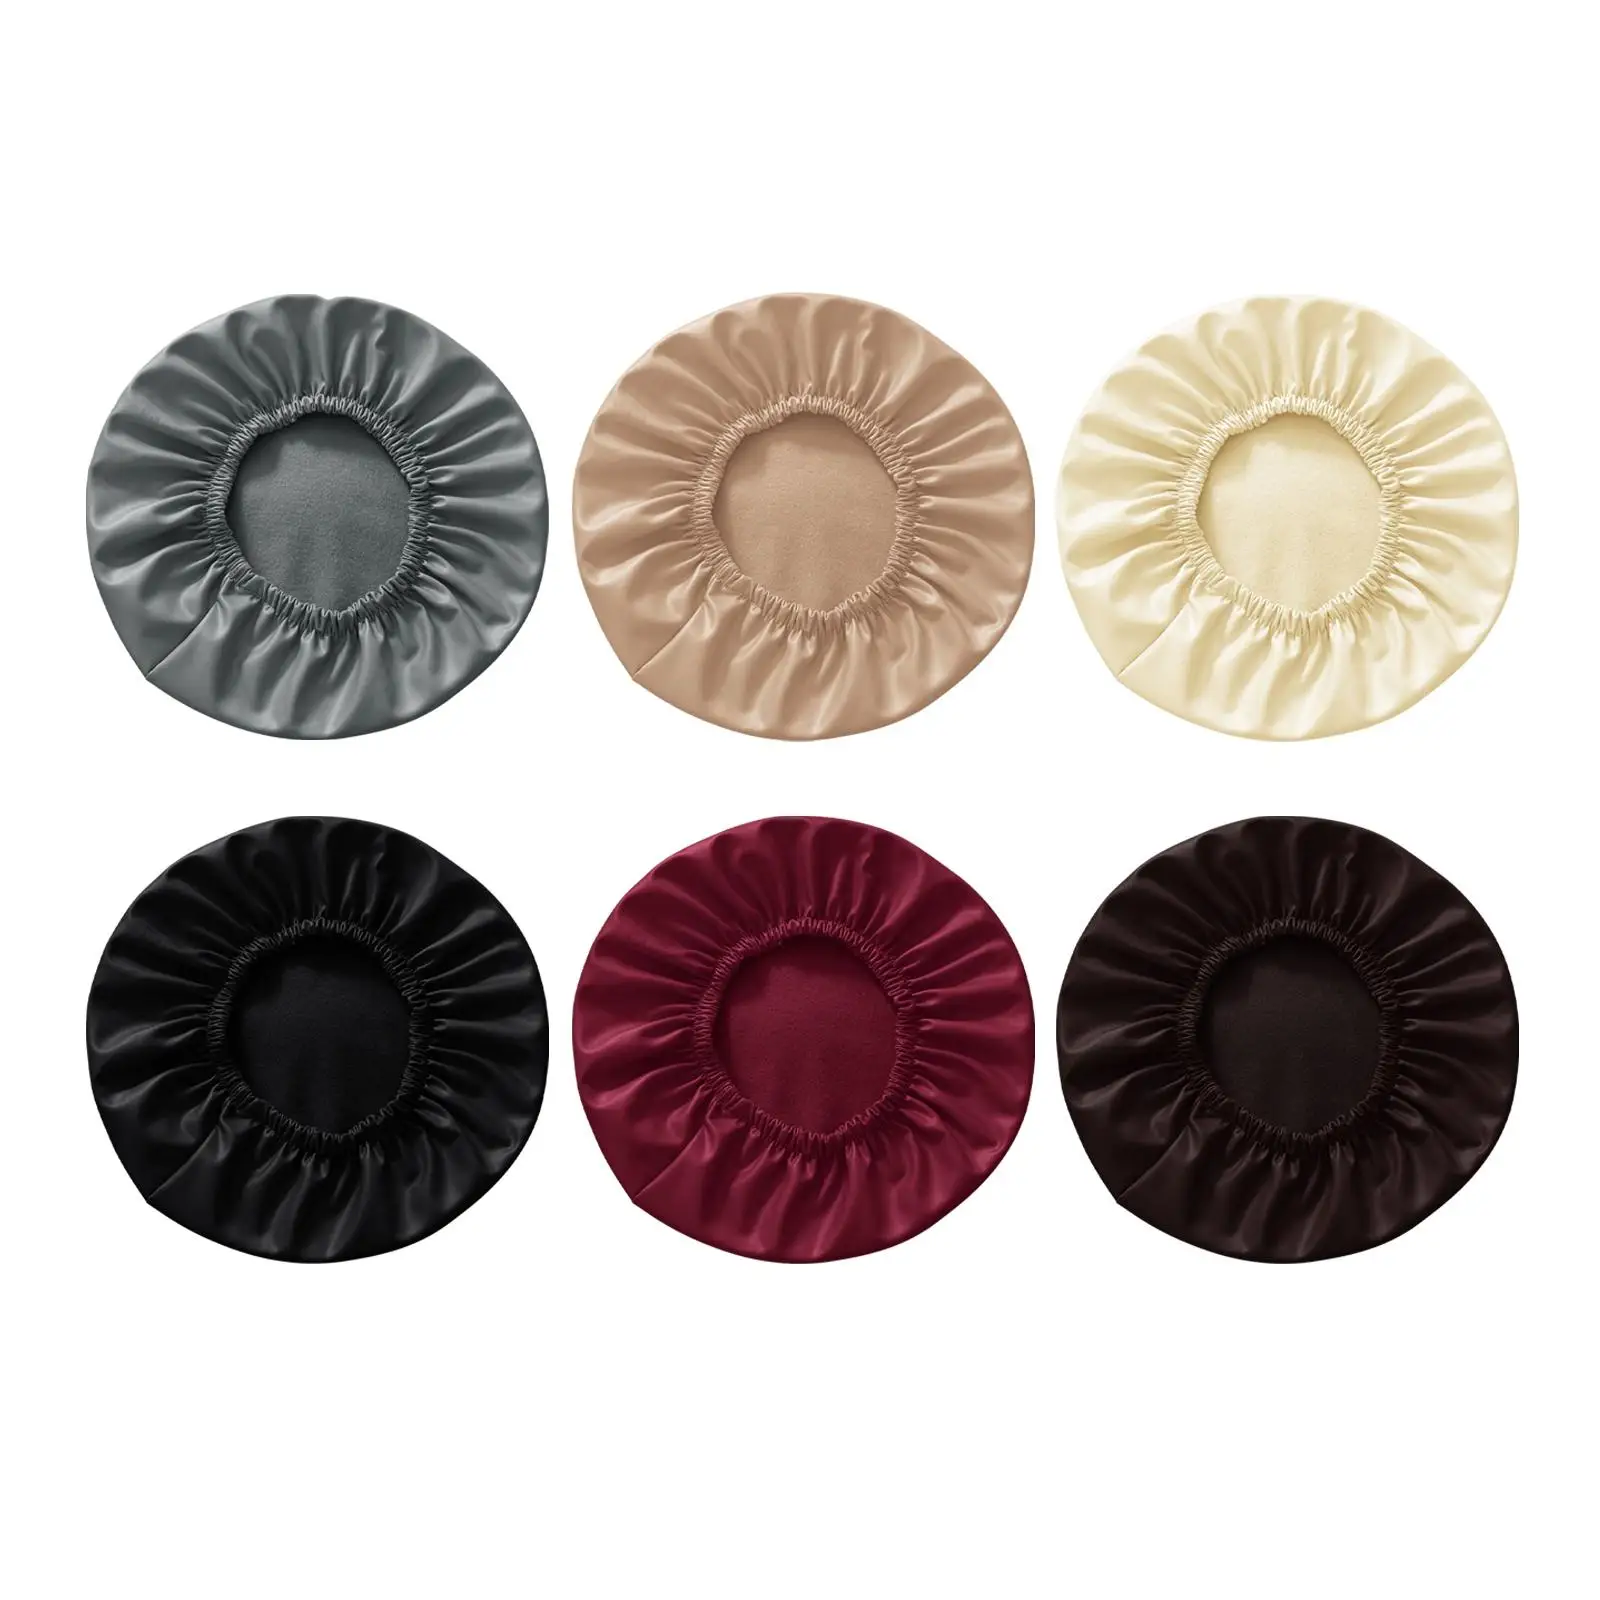 Elastic PU Leather Round Stool Chair Cover Waterproof Pump Chair Protector Small Round Seat Cushion Sleeve(no chair)